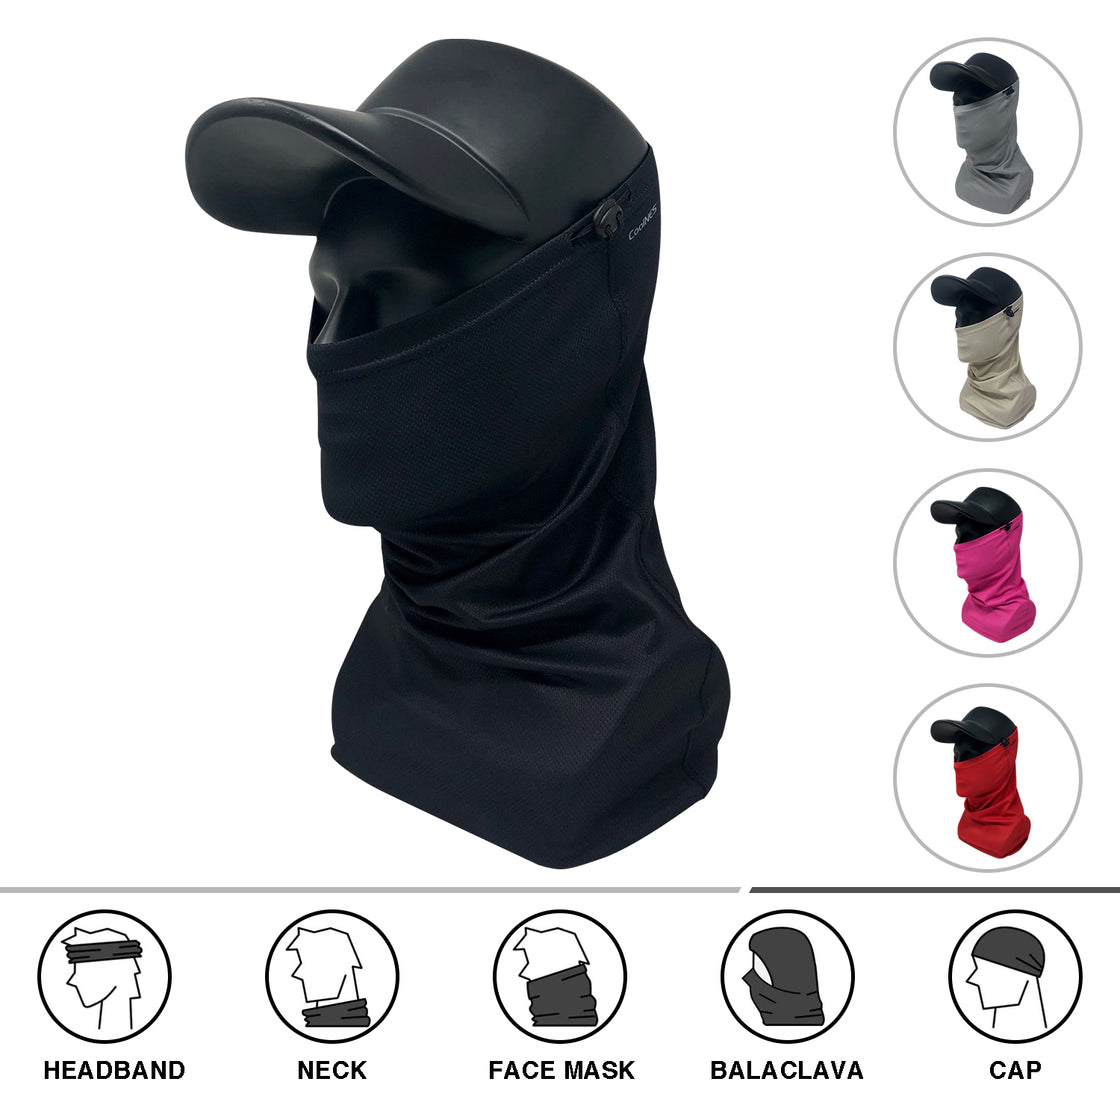 CoolNES - Neck Gaiter with Drawstring, Reusable Breathable Face Mask C –  CoolNES®